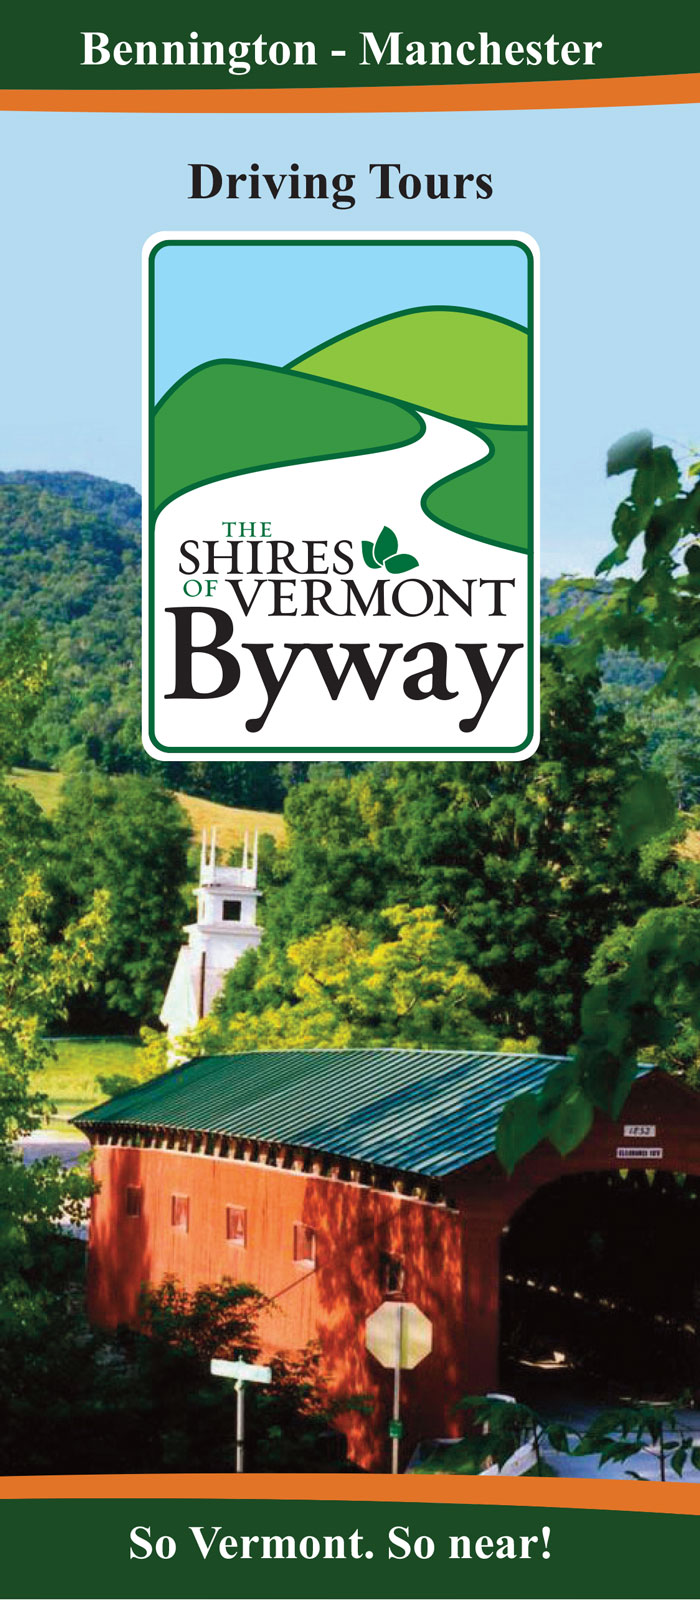 The Shires of Vermont Byway